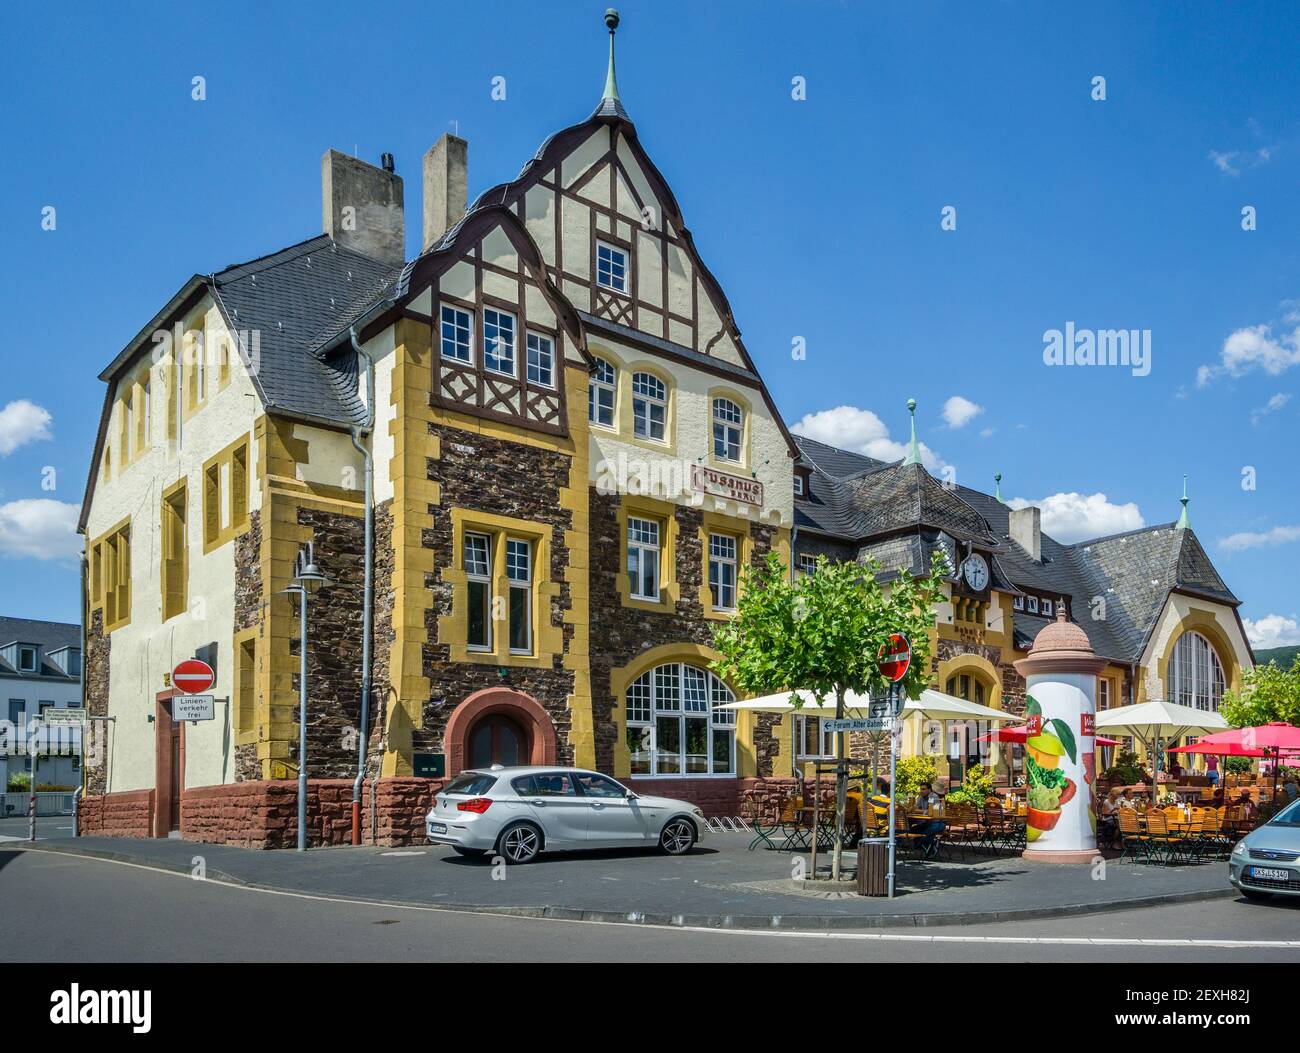 brewery at the former Cues railway station, now called The Brauhaus, Bernkastel-Kues, Middle Moselle, Rhineland-Palatinate, Germany Stock Photo